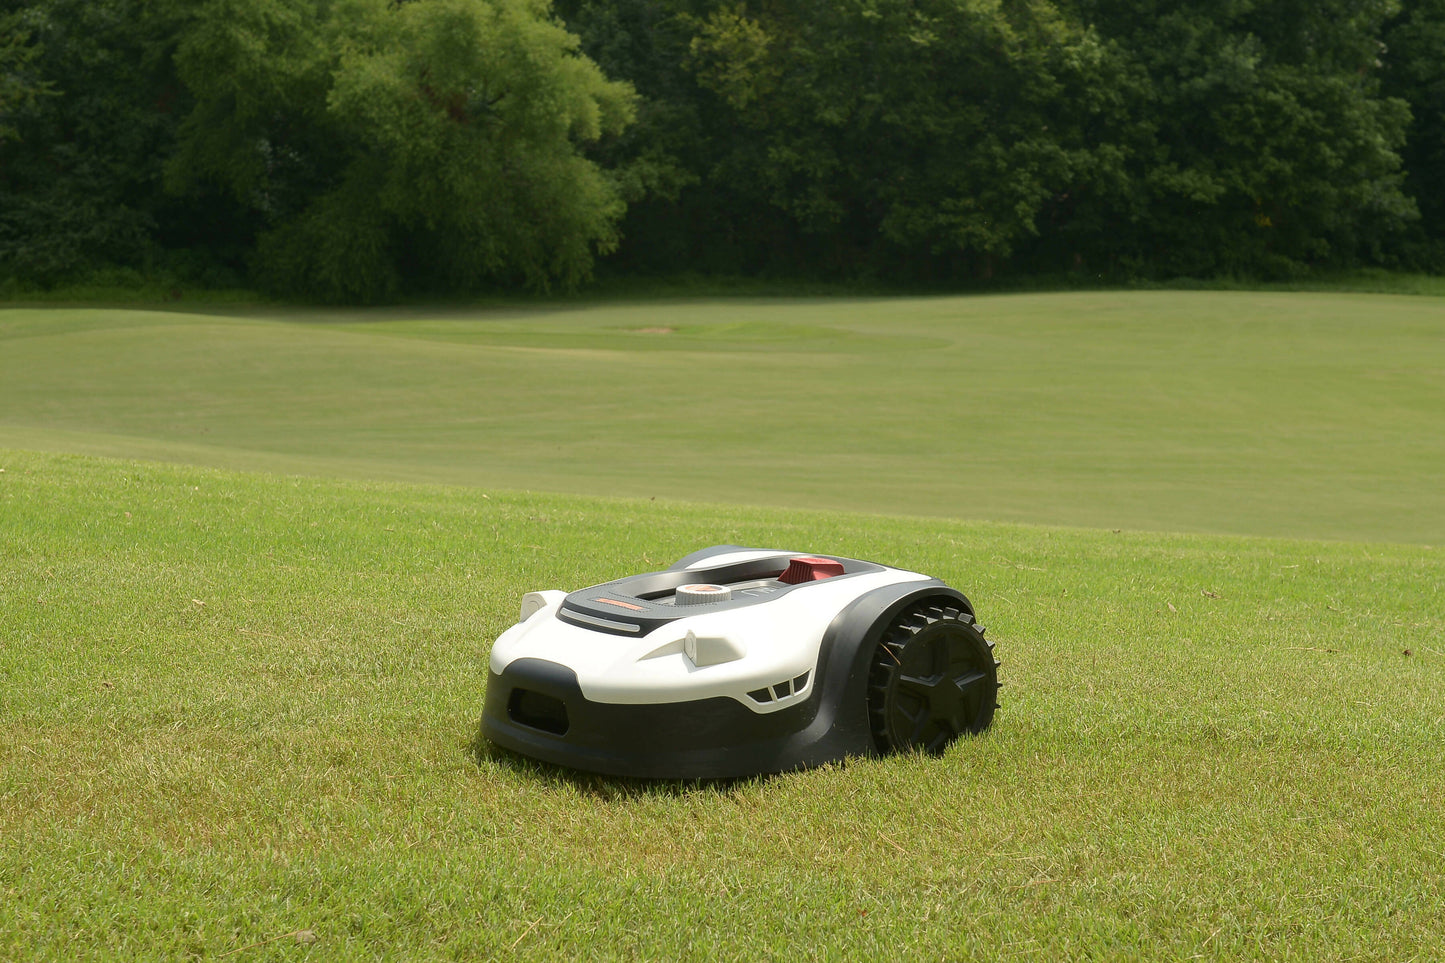 Sunseeker L22 Plus 1/2 acre Robotic Mower without GPS